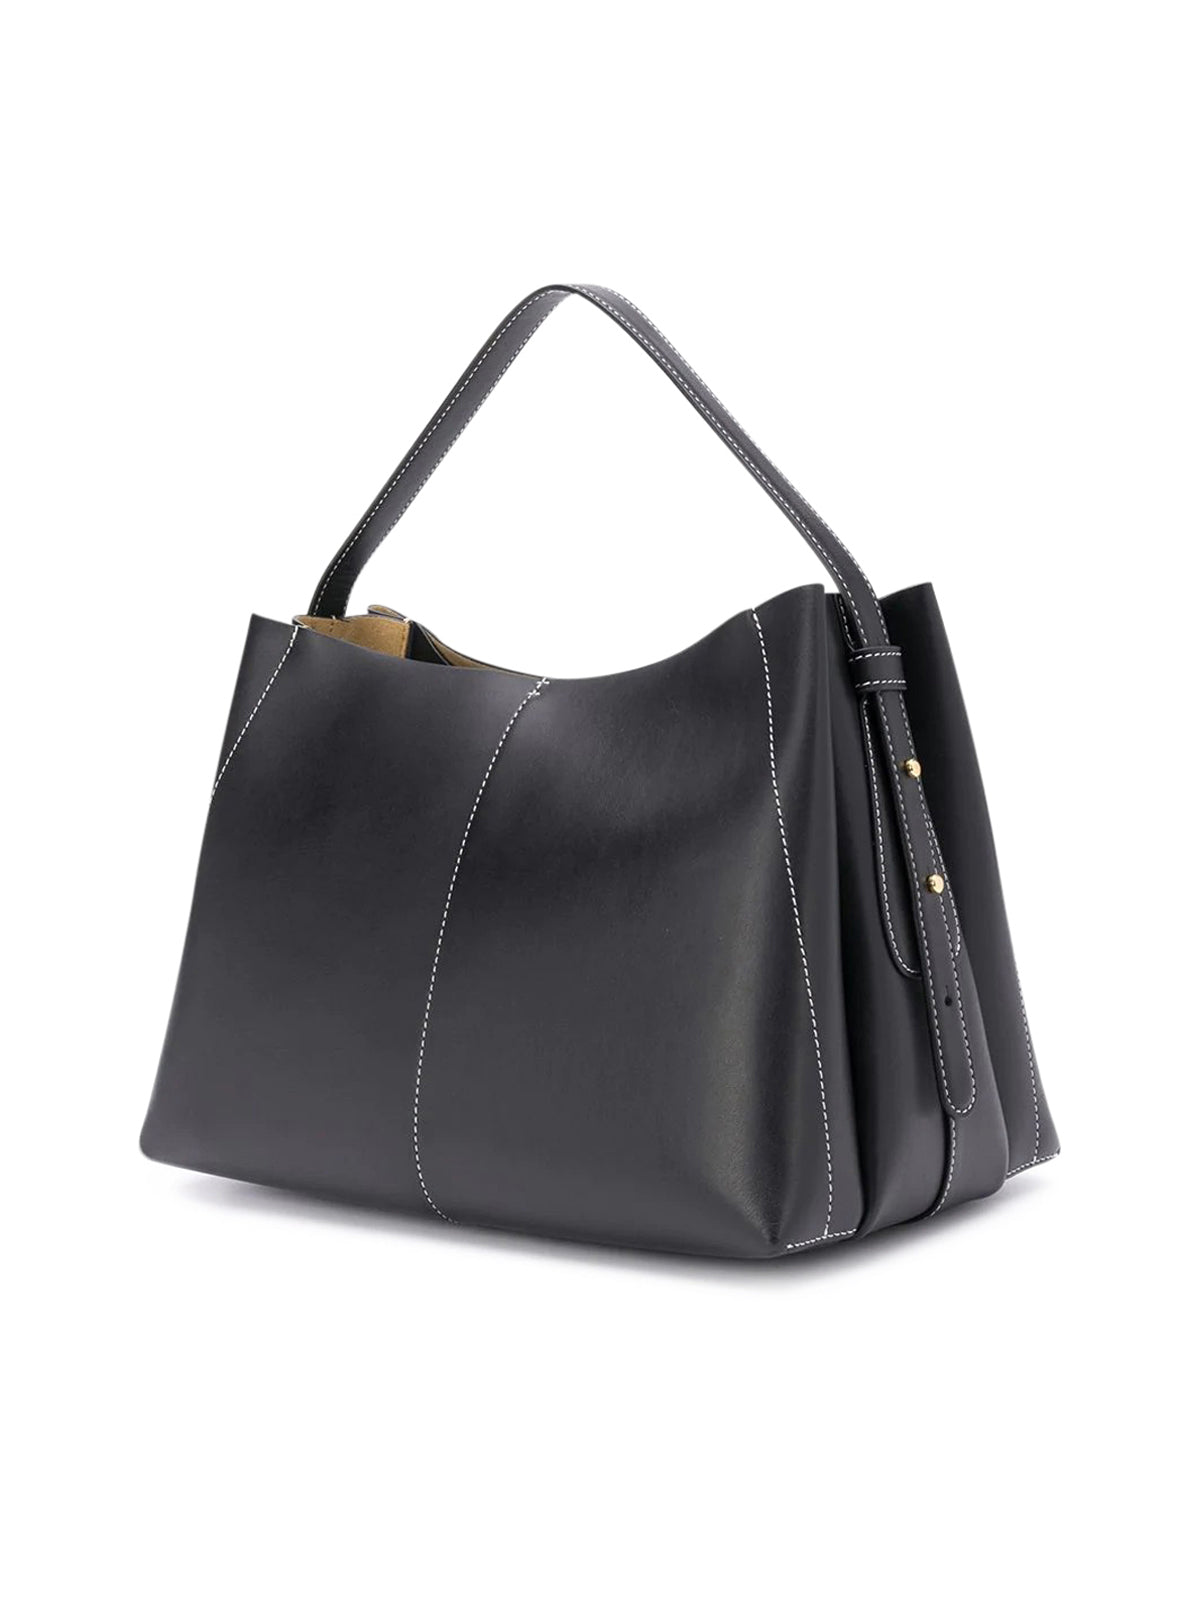 "Ava" large leather tote bag